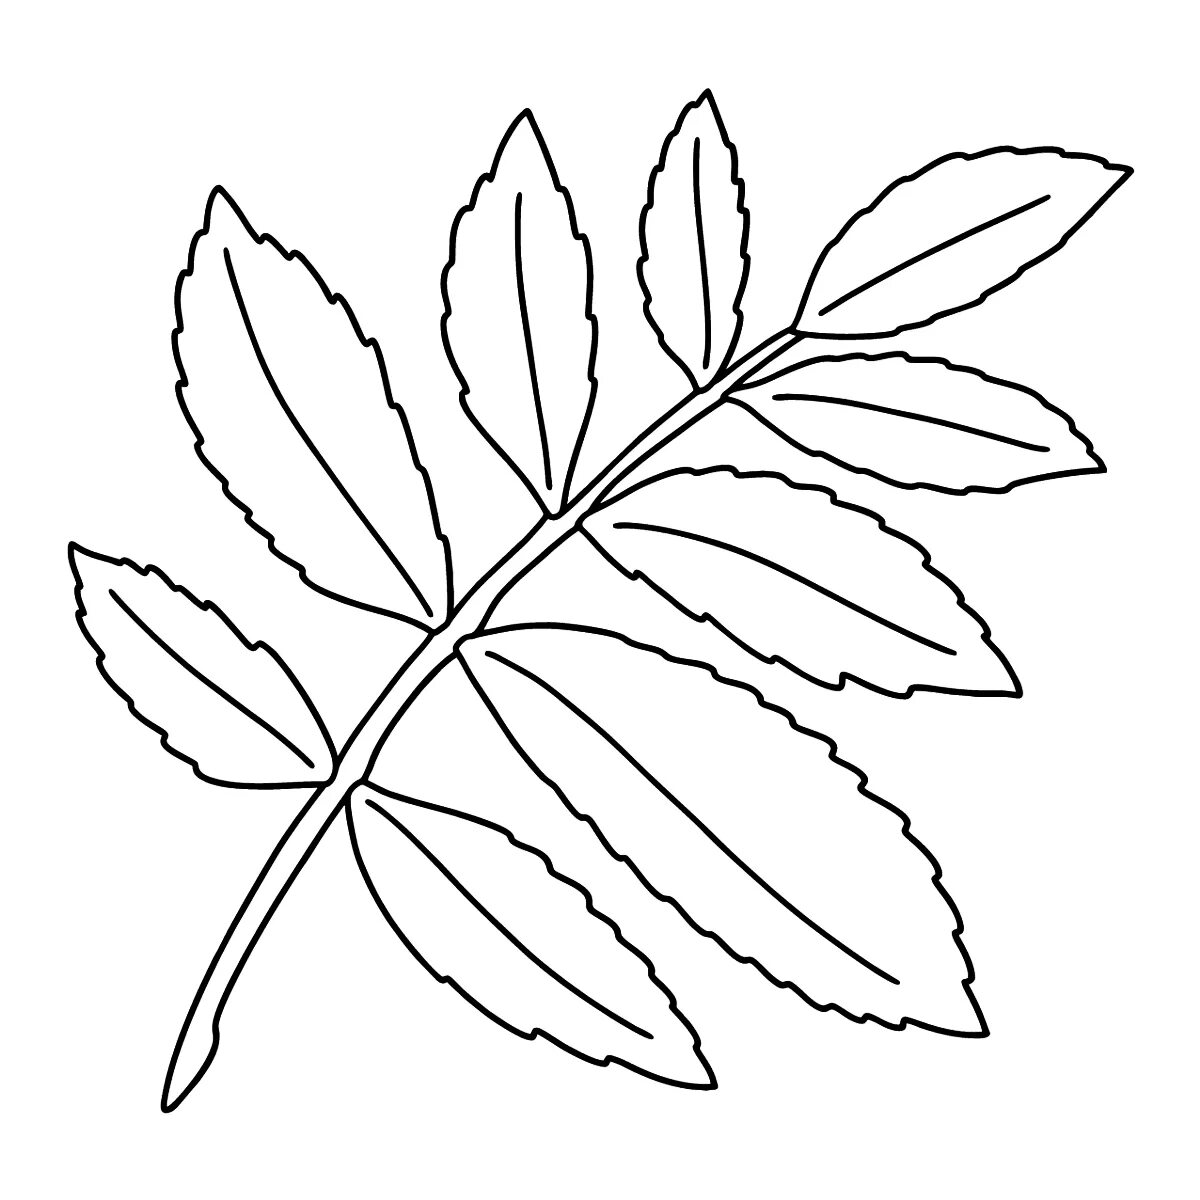 Mysterious rowan leaf coloring page